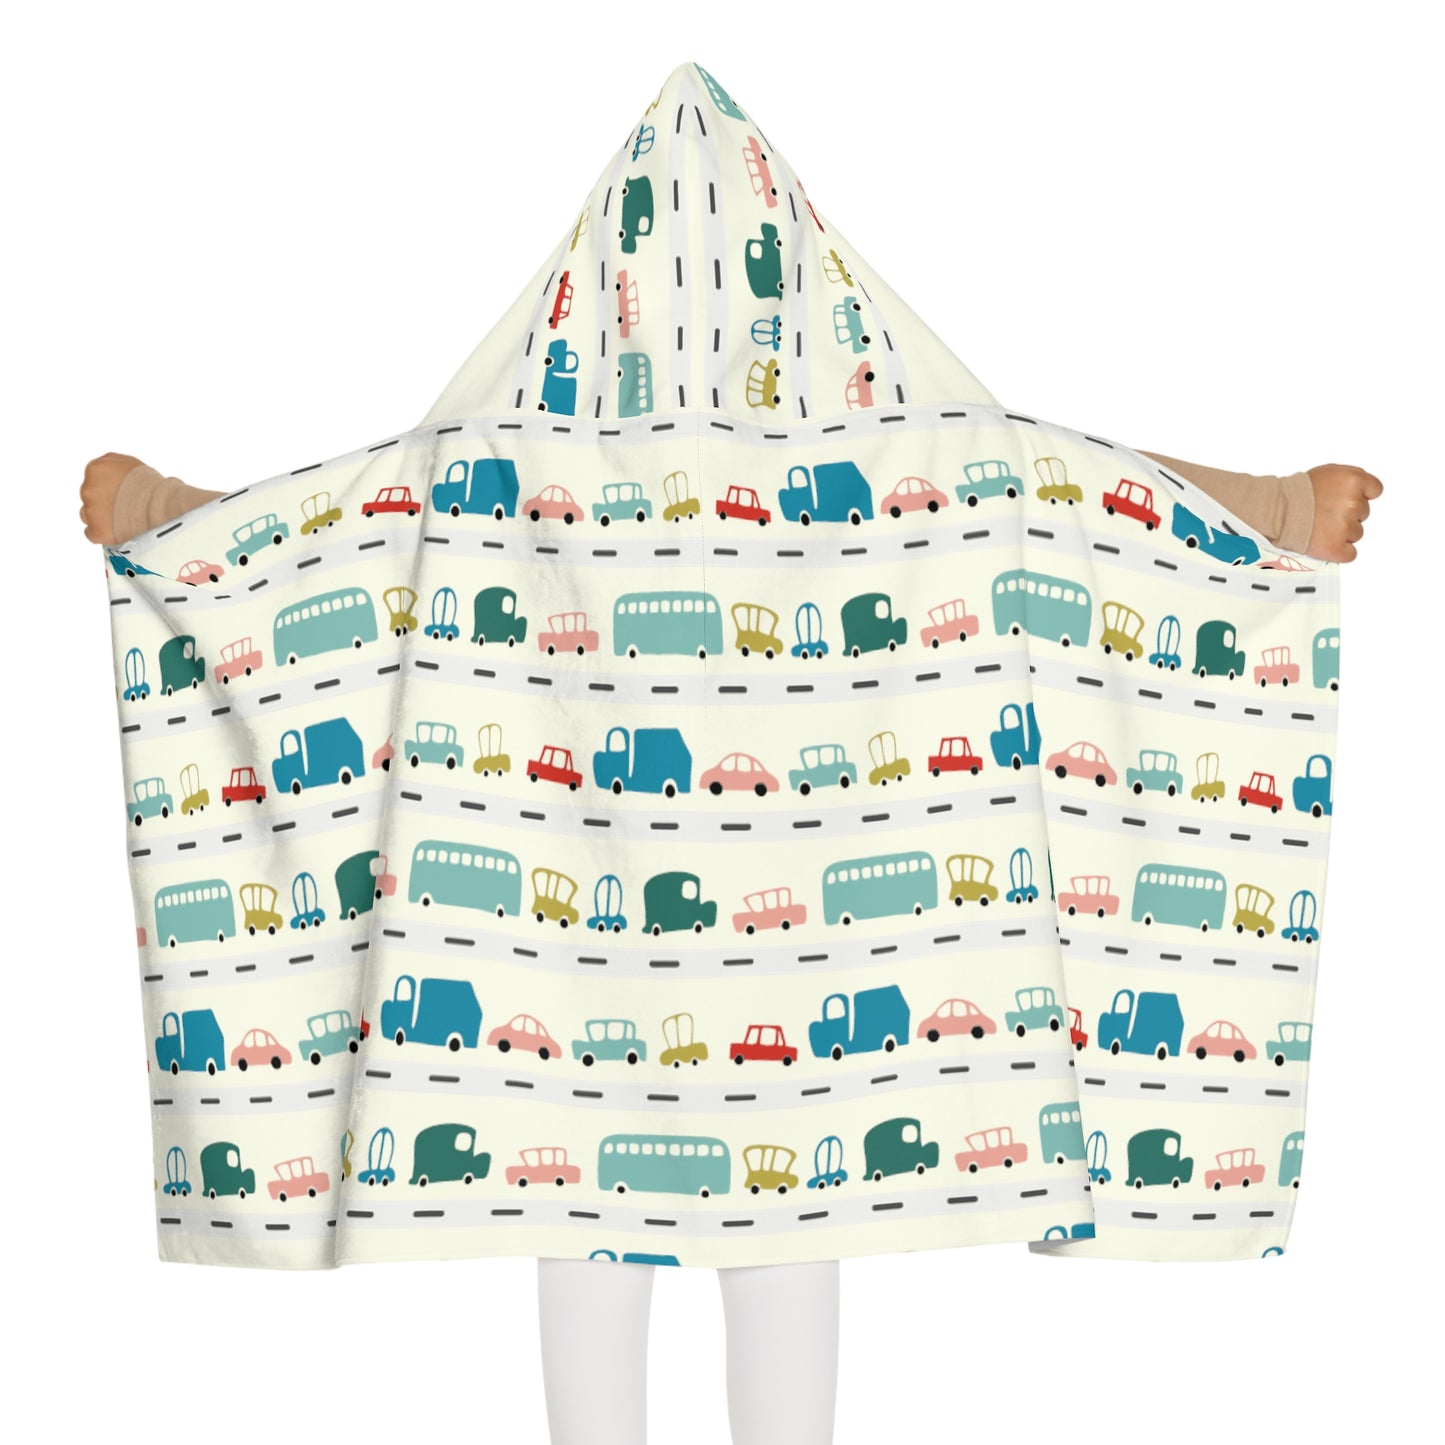 Traffic Jam Personalized Kids Hooded Towel, Car Pattern, Youth Hooded Towel, Personalized Gift, Car Towel with Name, Hooded Name Towel